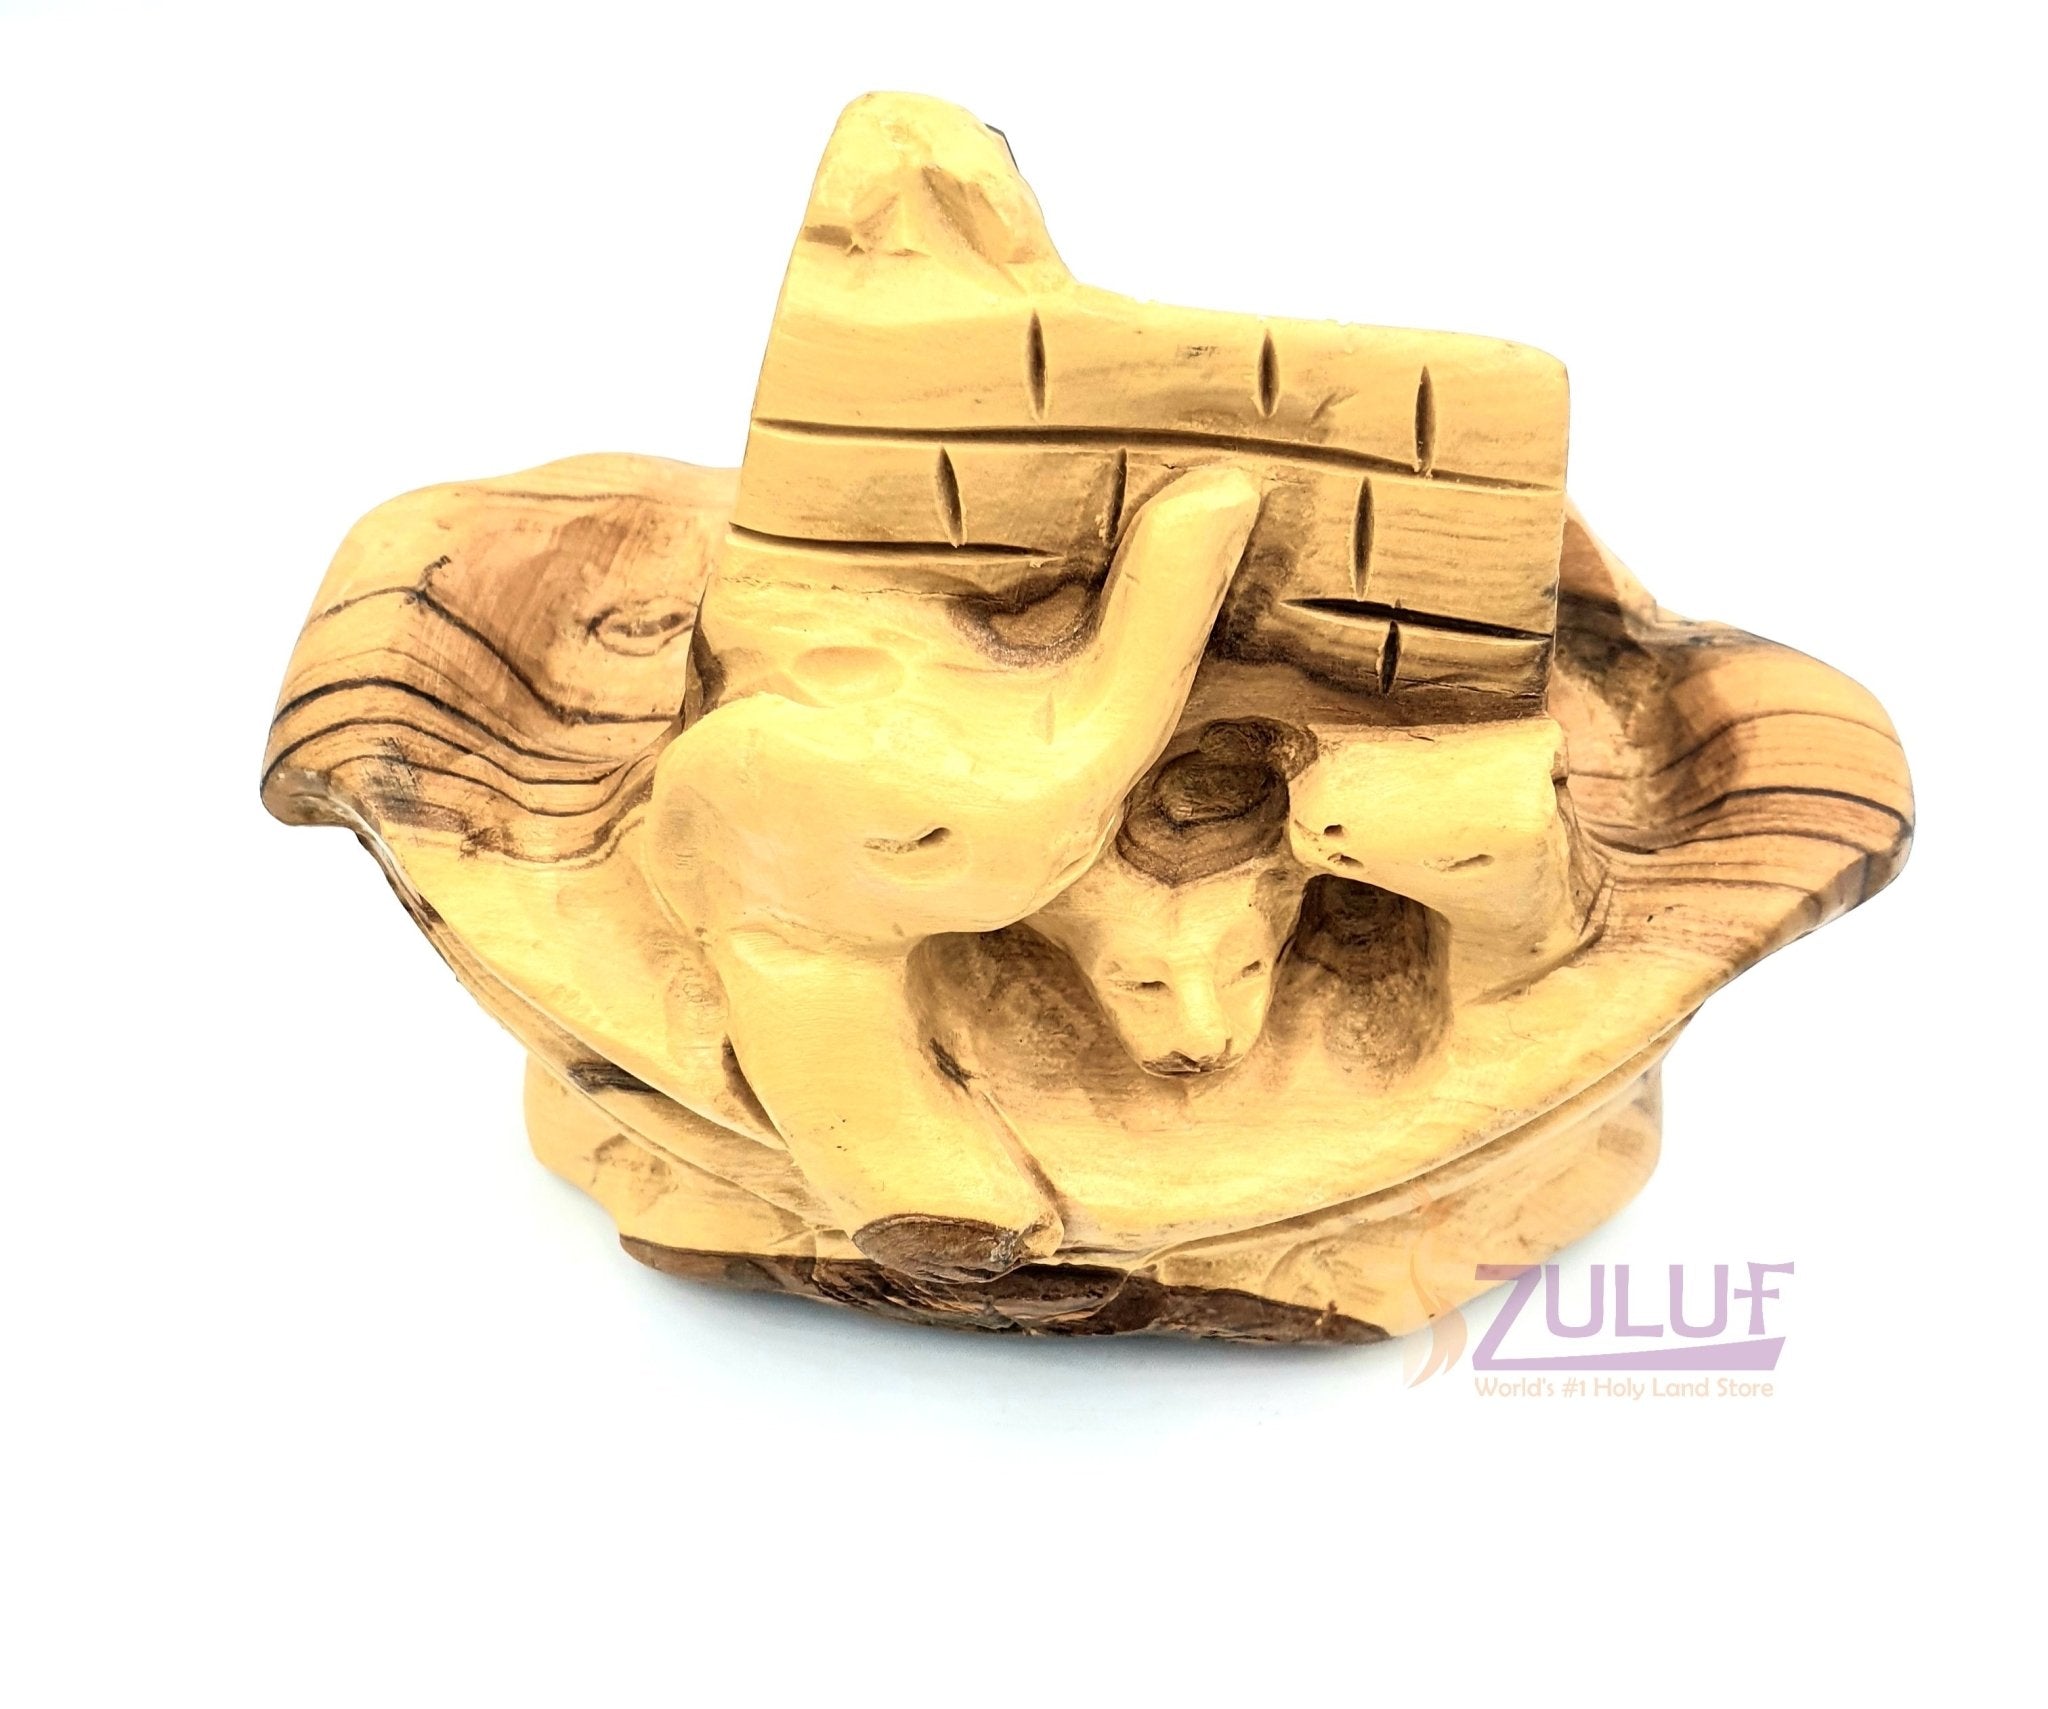 Olive wood Noah's Ark Statue Holy Land Gift ANI004 - Zuluf